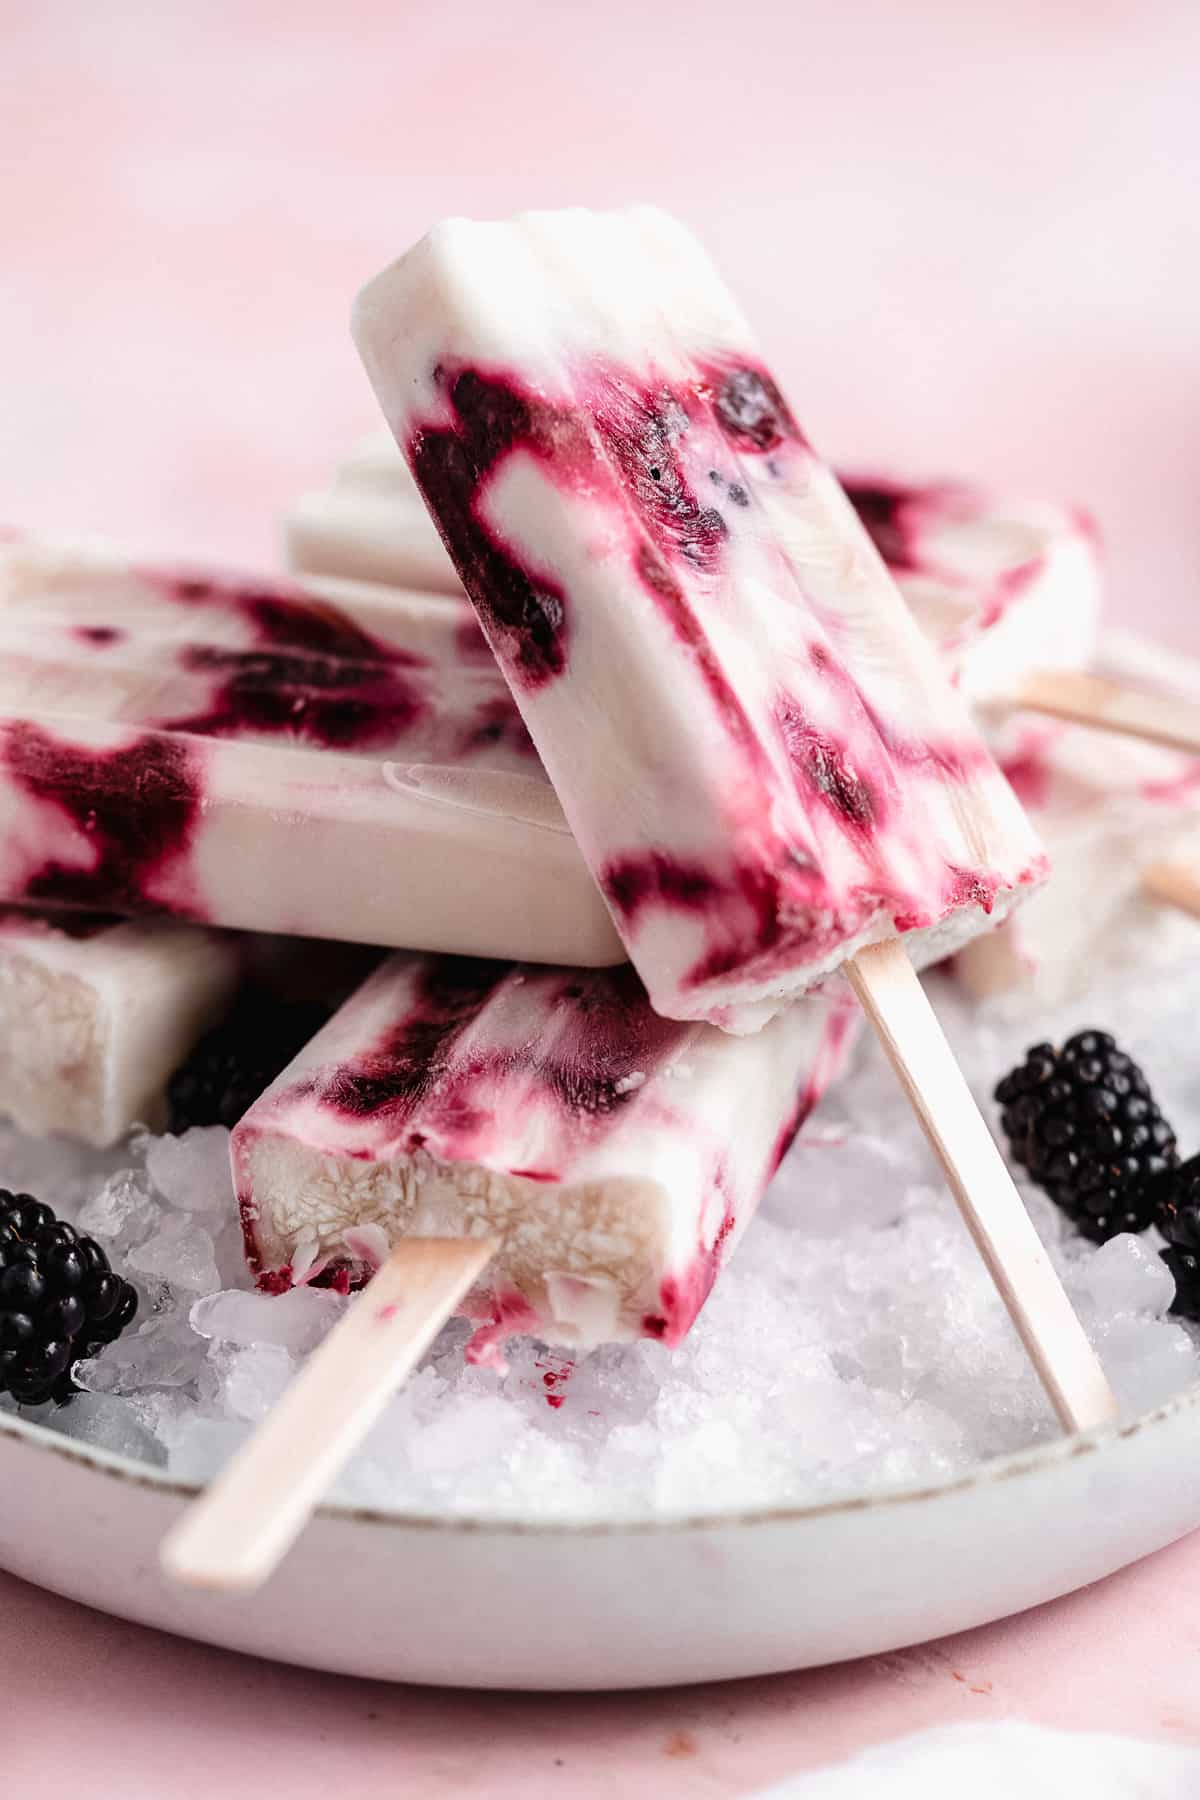 Side view closeup photo of several popsicles mounded on a layer of ice on a white plate.  Extra blackberries are sprinkled around.  